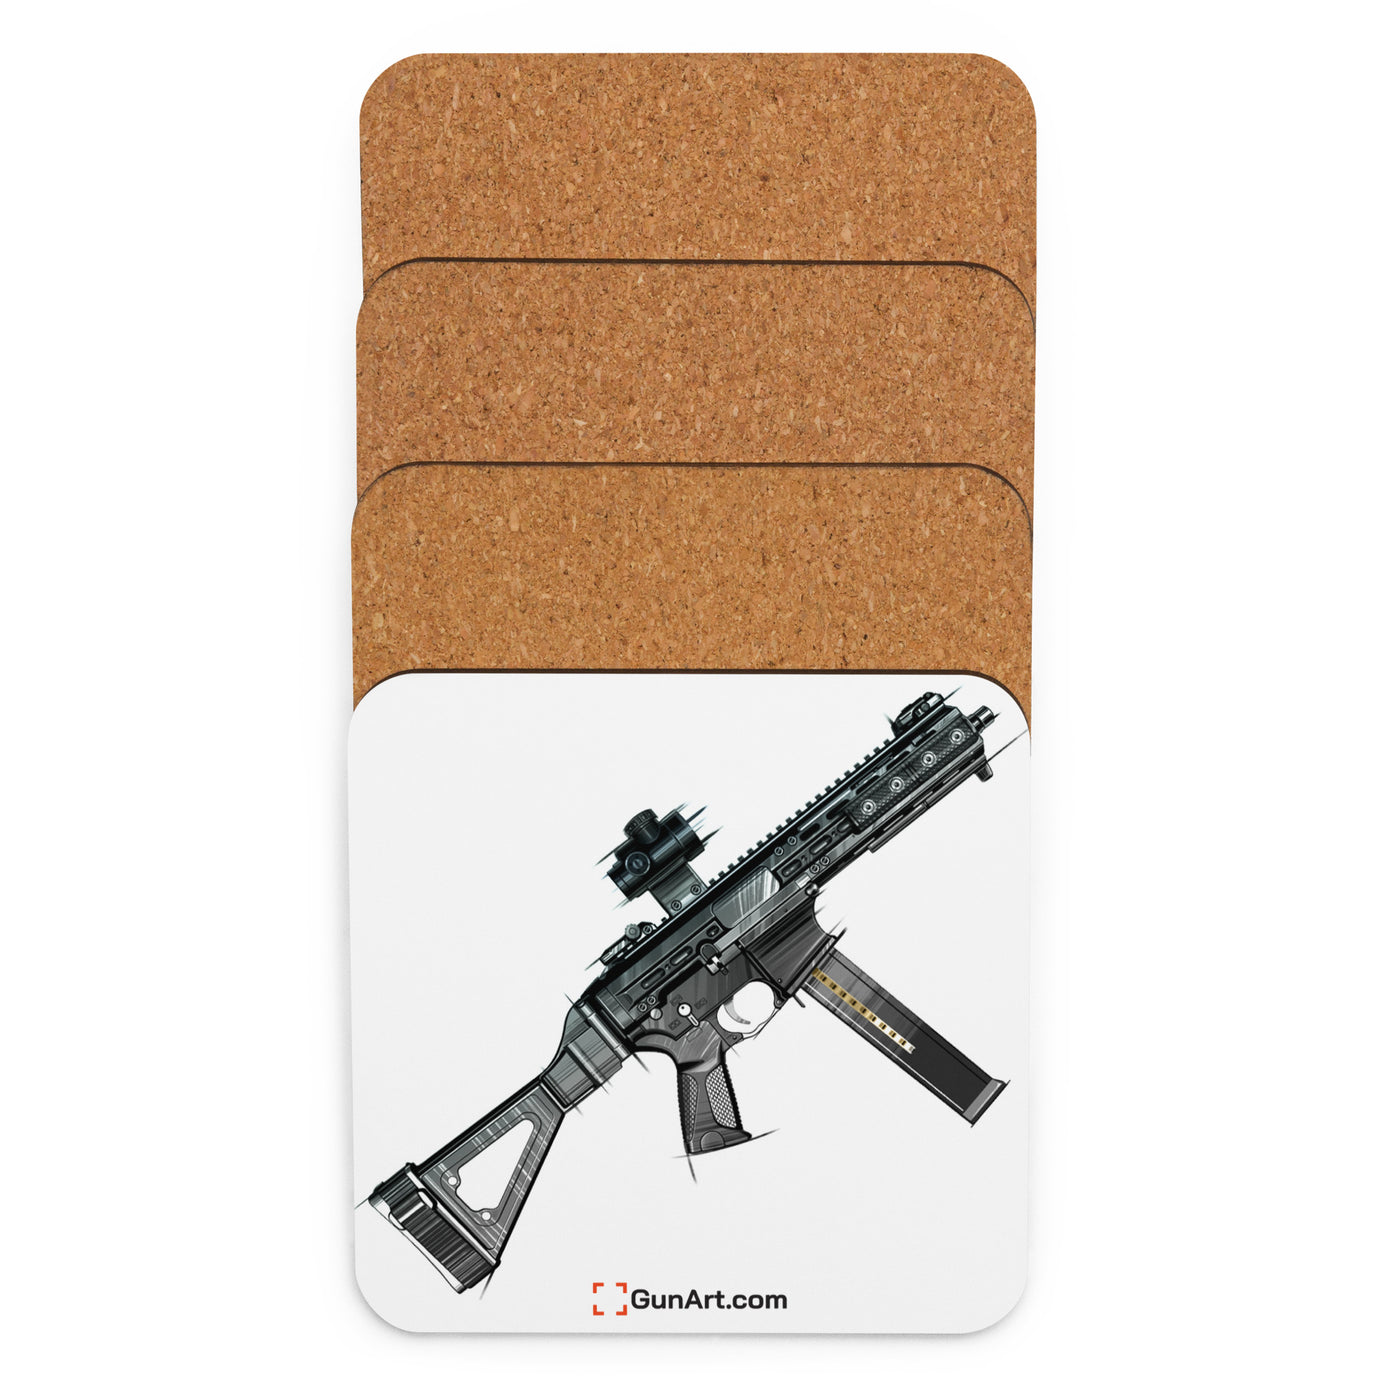 .45 Cal SMG Cork-back Coaster - Just The Piece